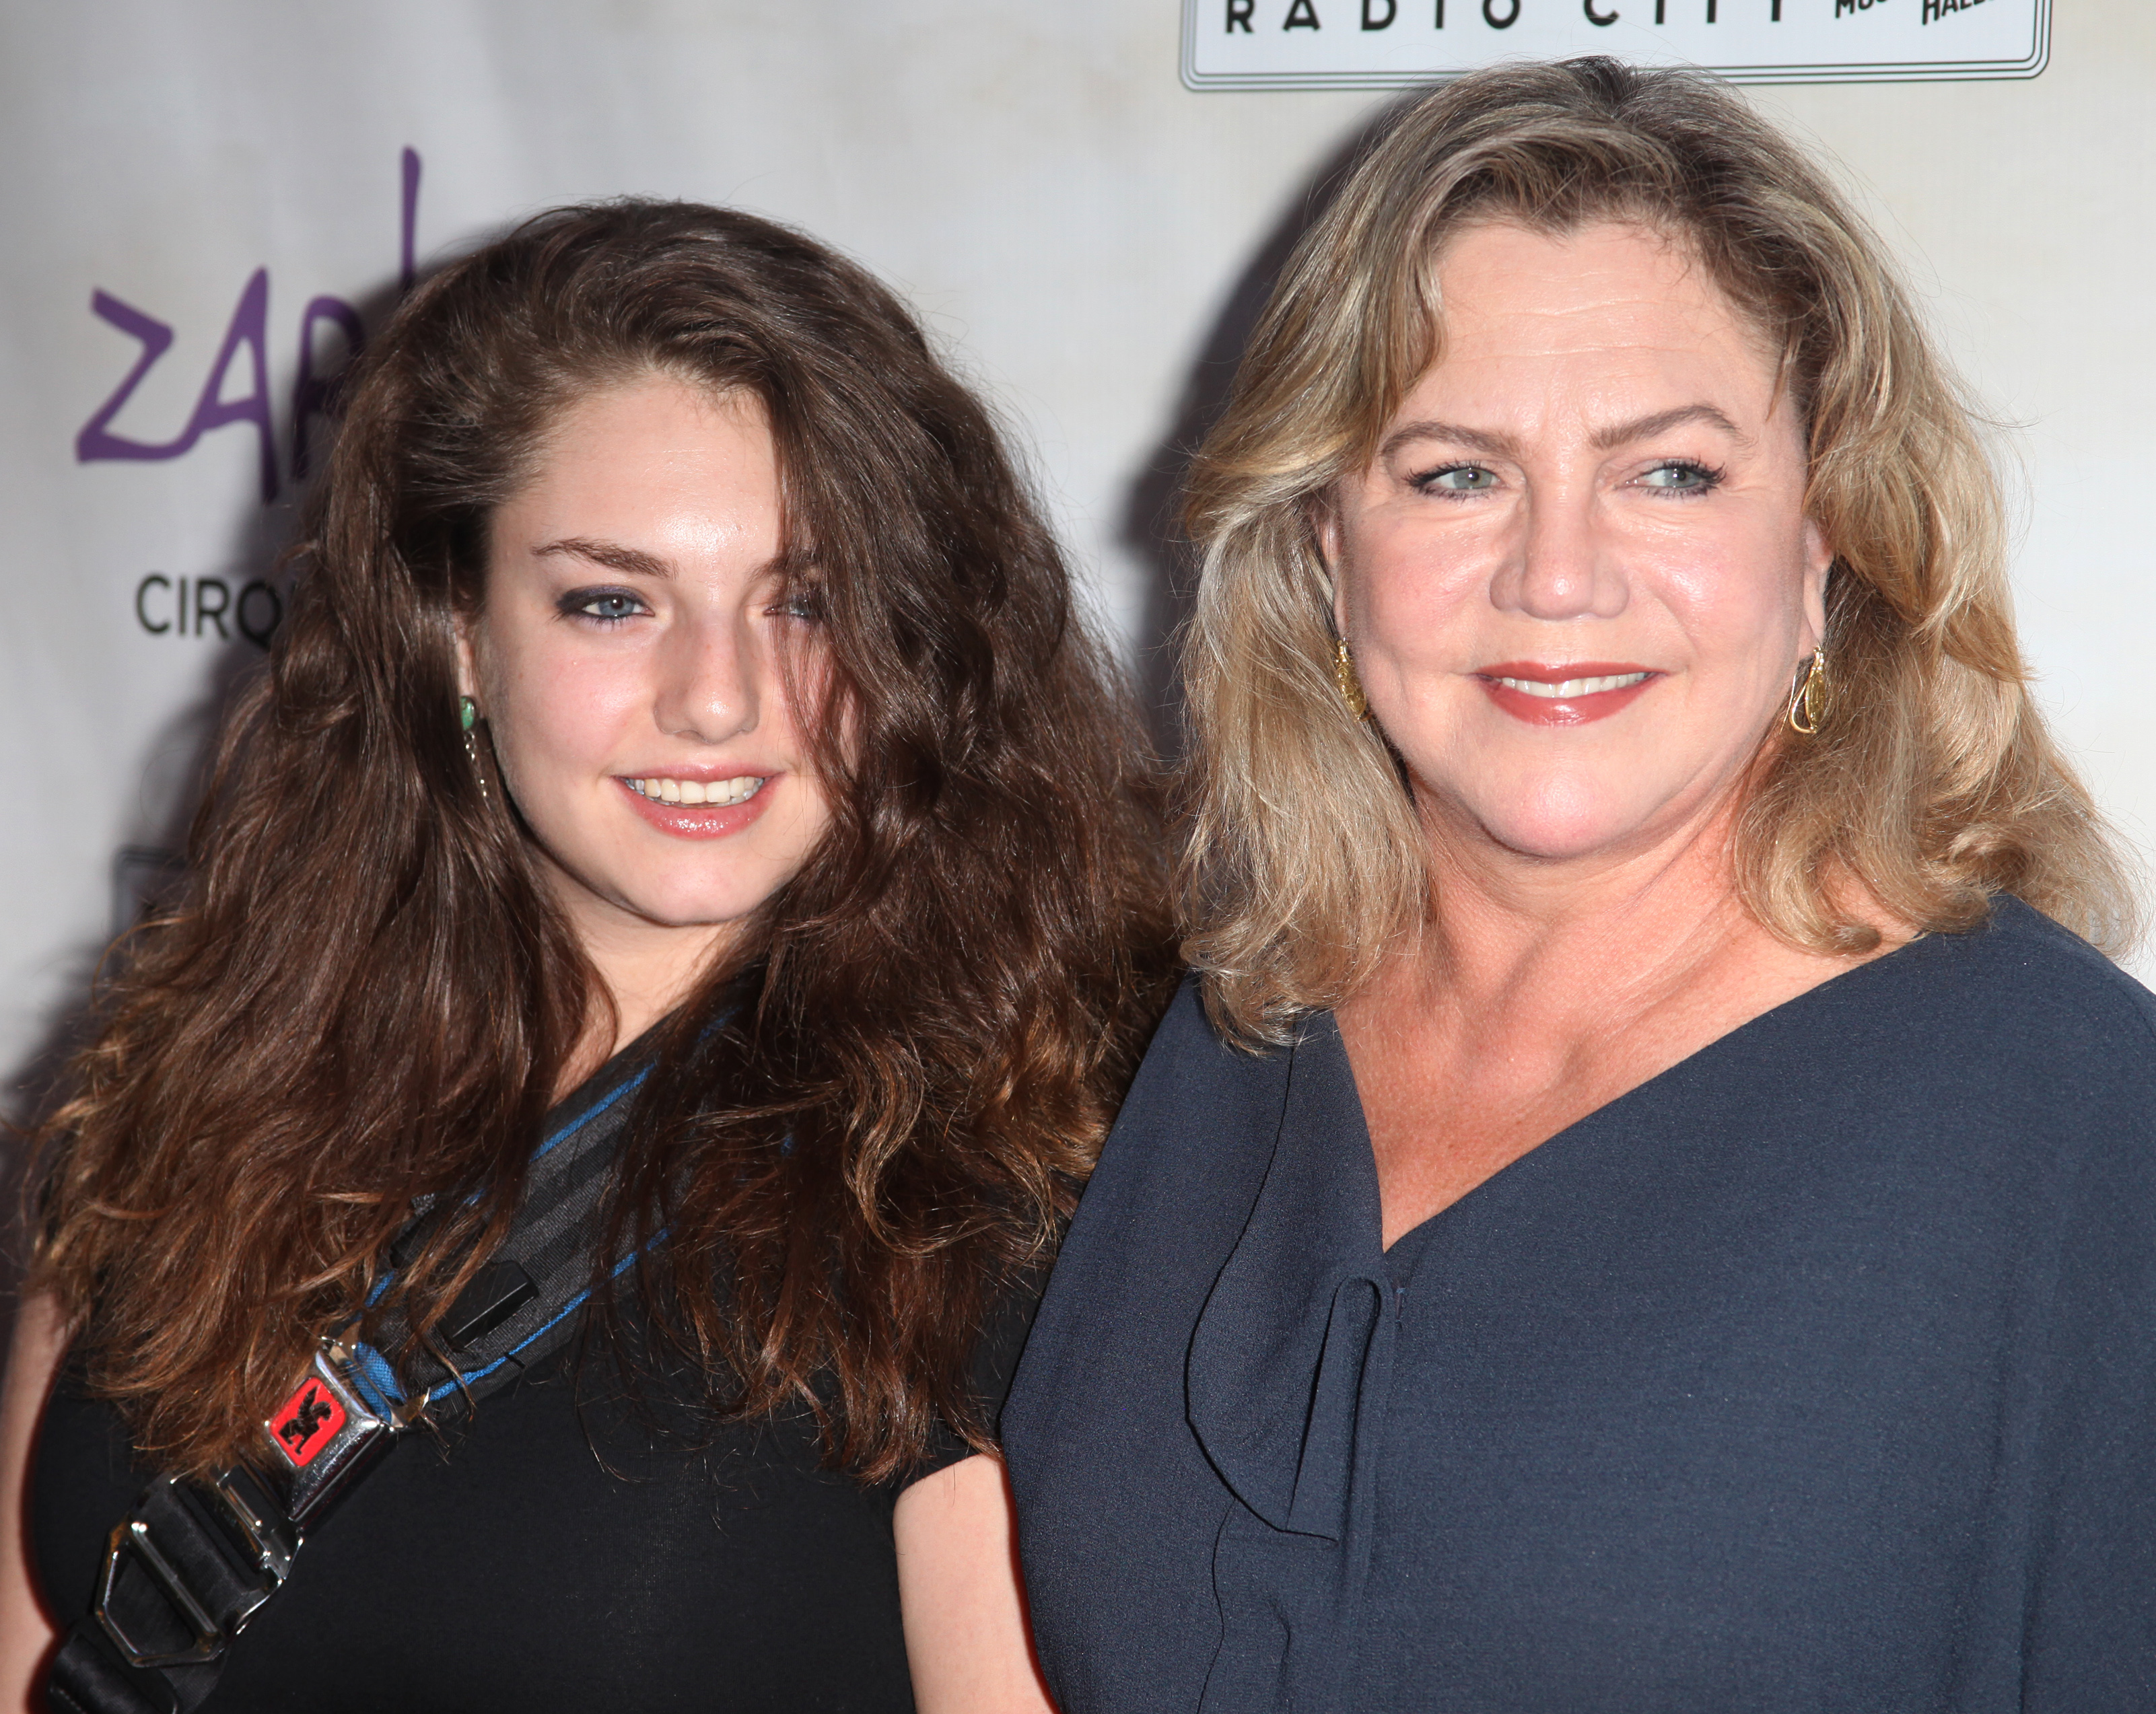 Rachel Ann Weiss and Kathleen Turner at the "Zarkana" Opening Night in New York in 2011 | Source: Getty images